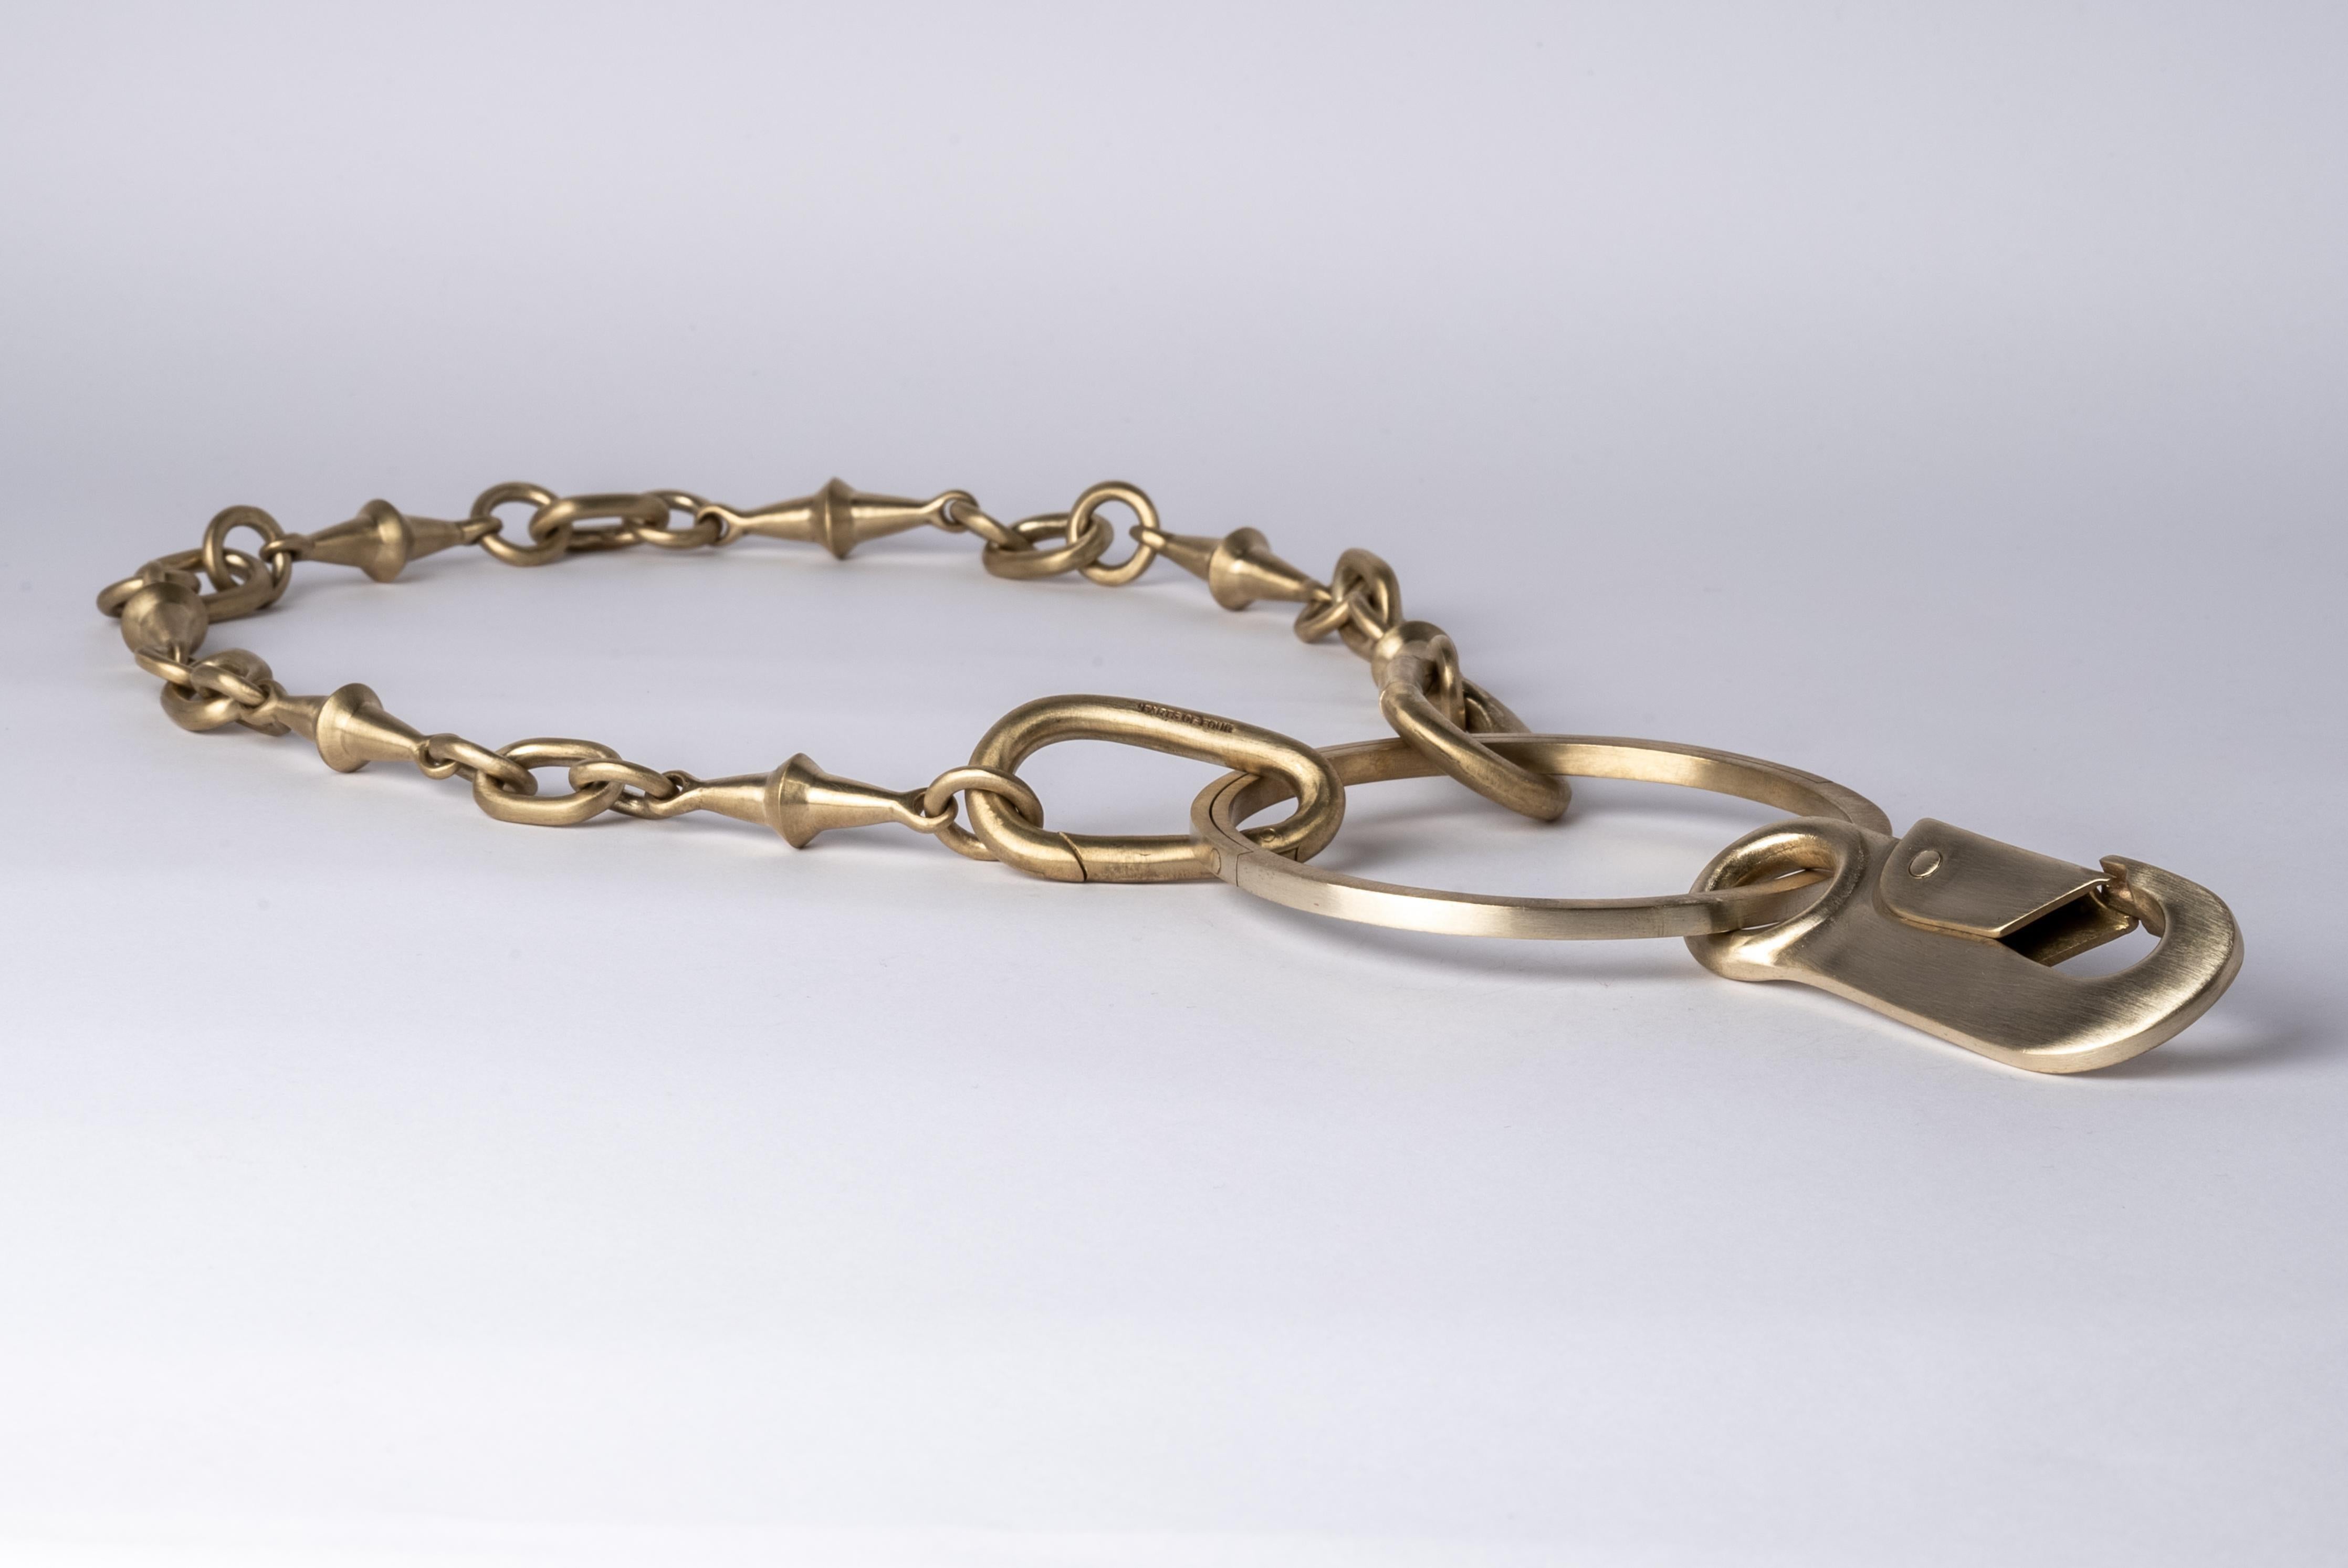 Totemic chain necklace in brass.
The Charm System is an interrelated group of products that can be mixed and matched or worn individually. 
Chain length (closure to closure): 670 mm
Portal diameter: 83 mm
Clip (H × W): 75 × 28 mm